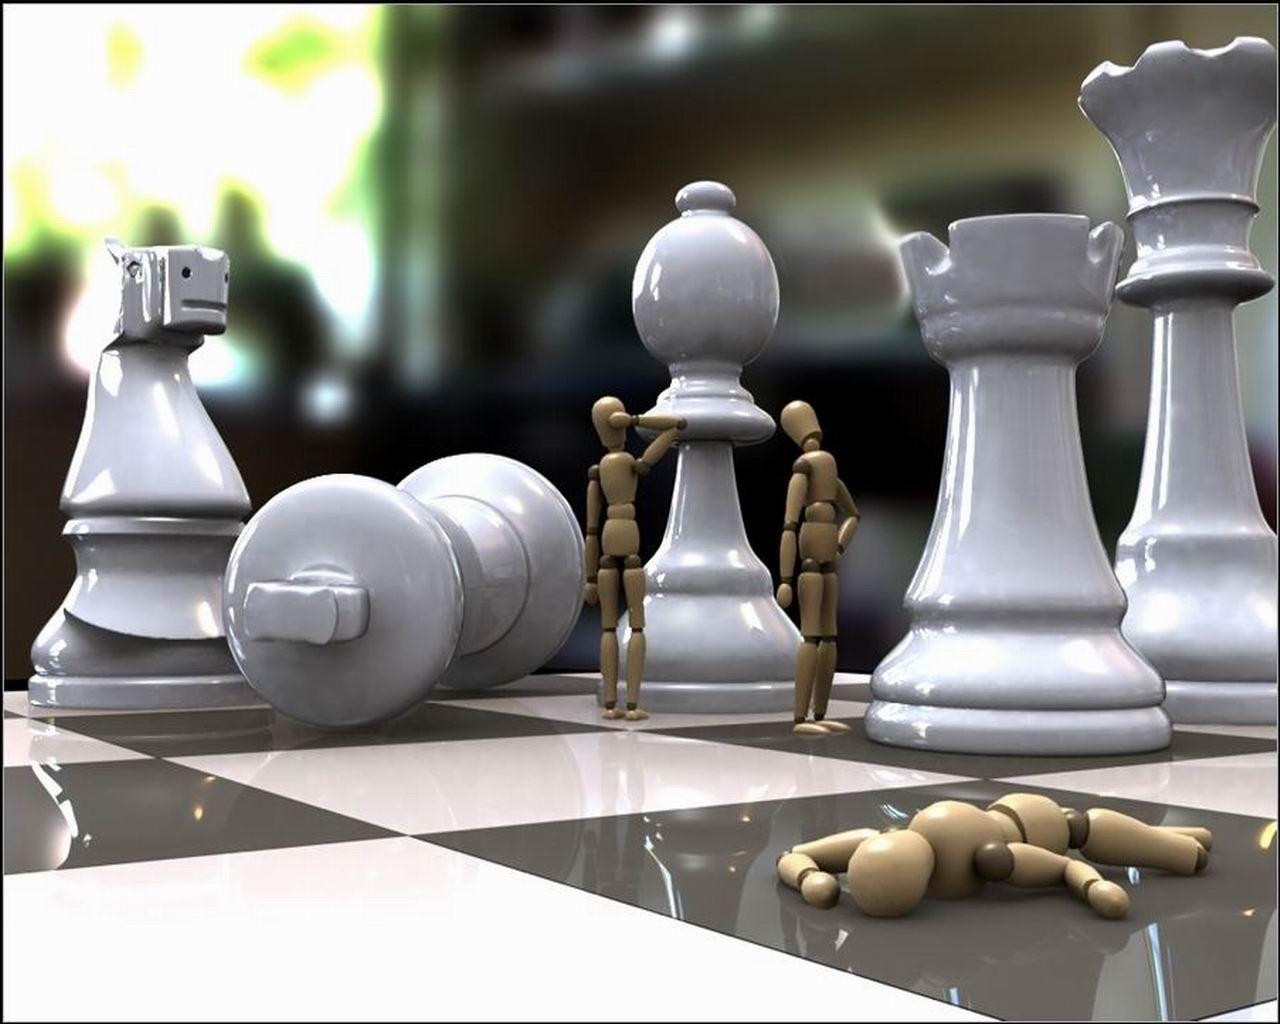 Chess Board Wallpapers